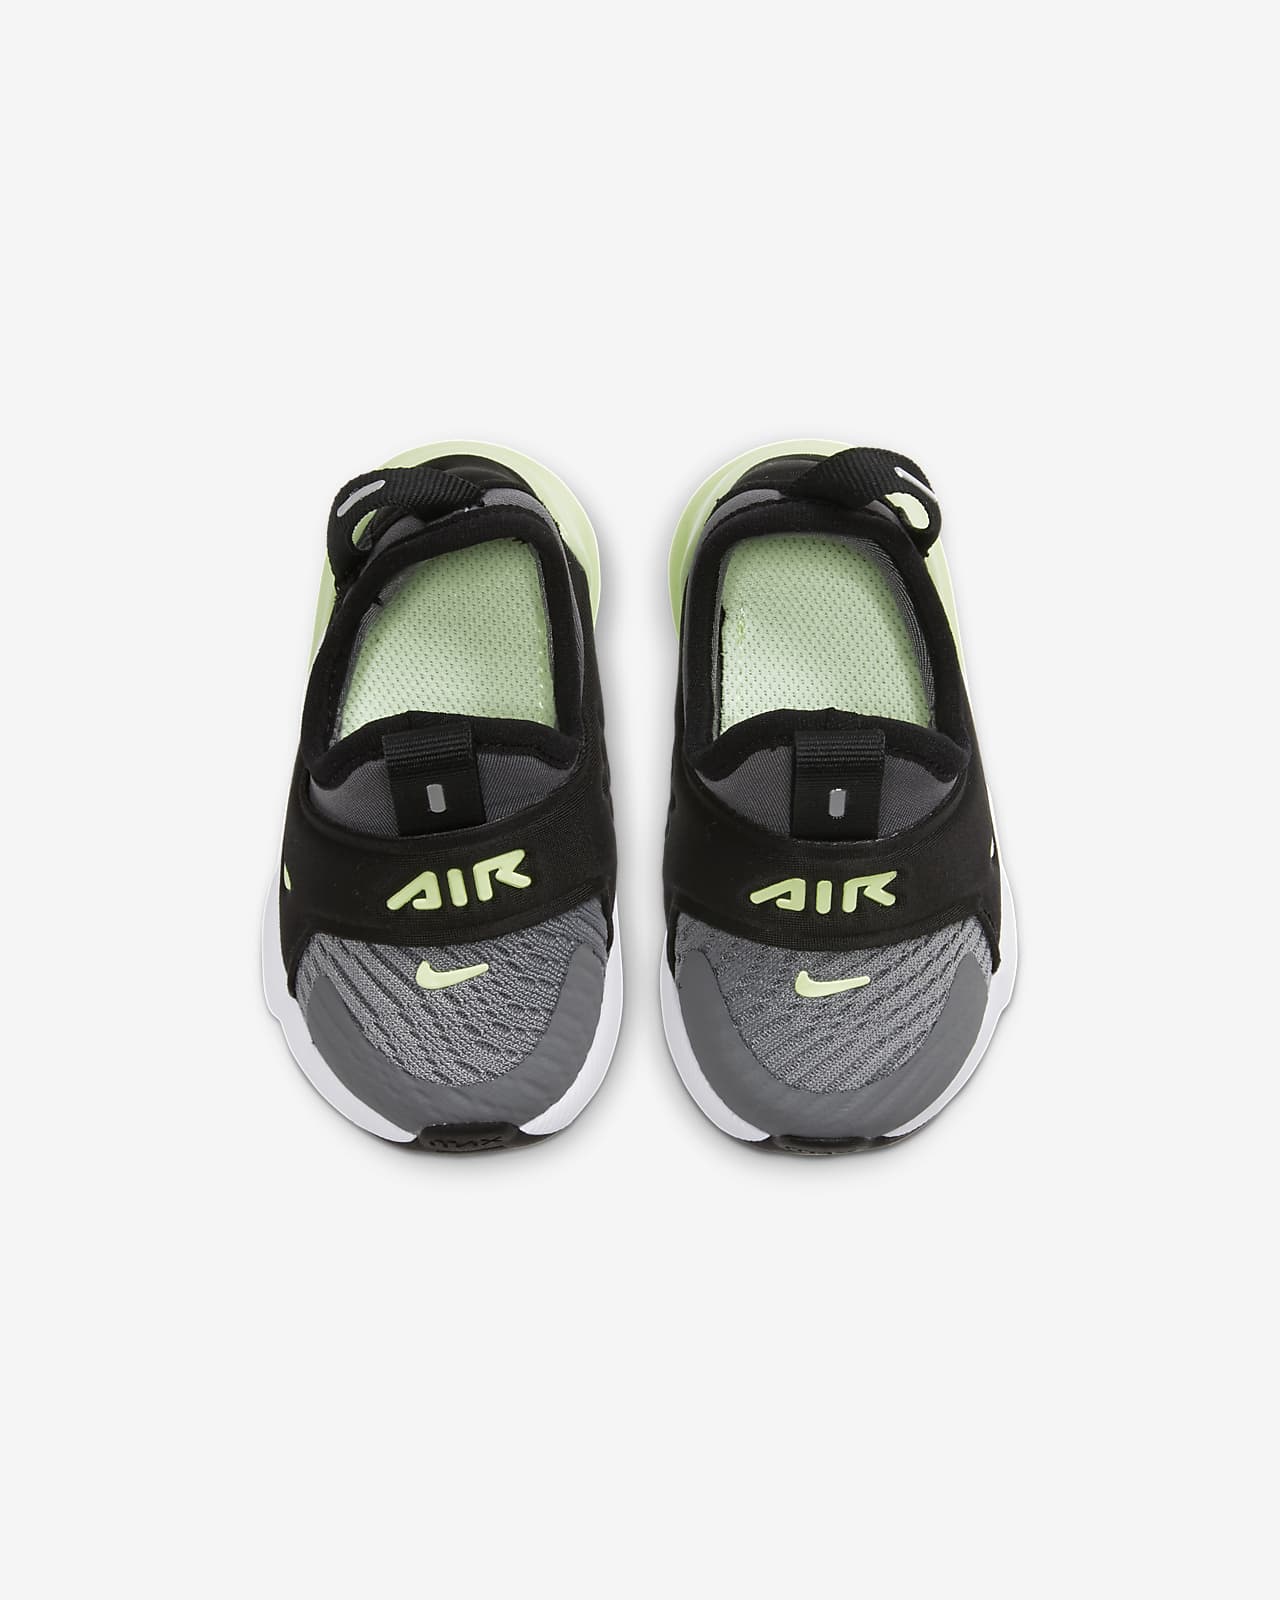 infant nike 270 trainers cheap online